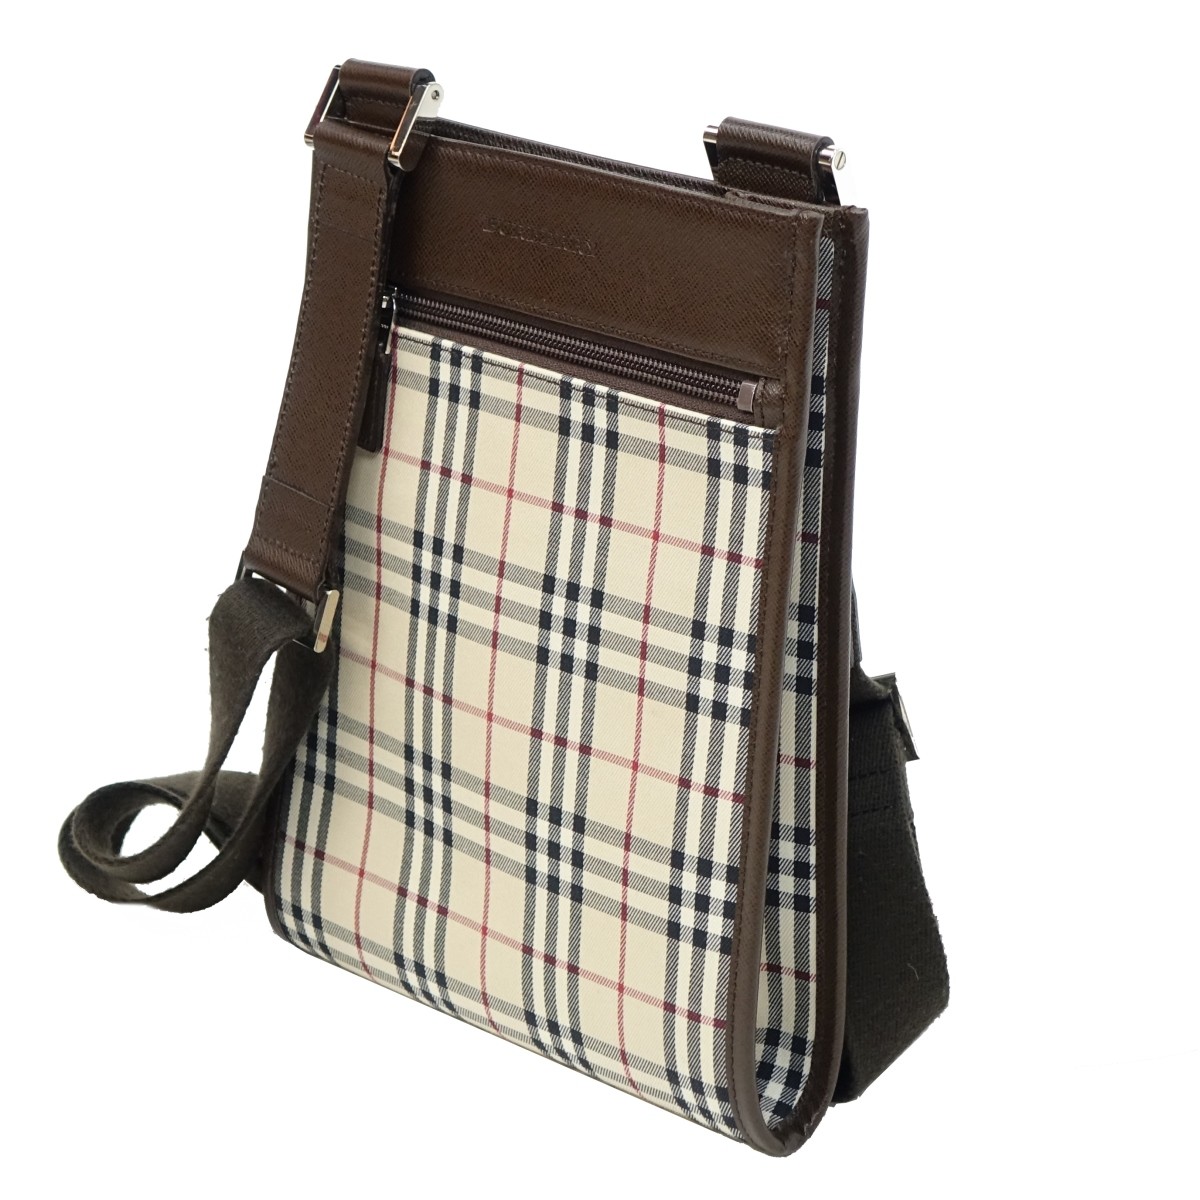 Burberry House Check Leather Crossbody Tote.